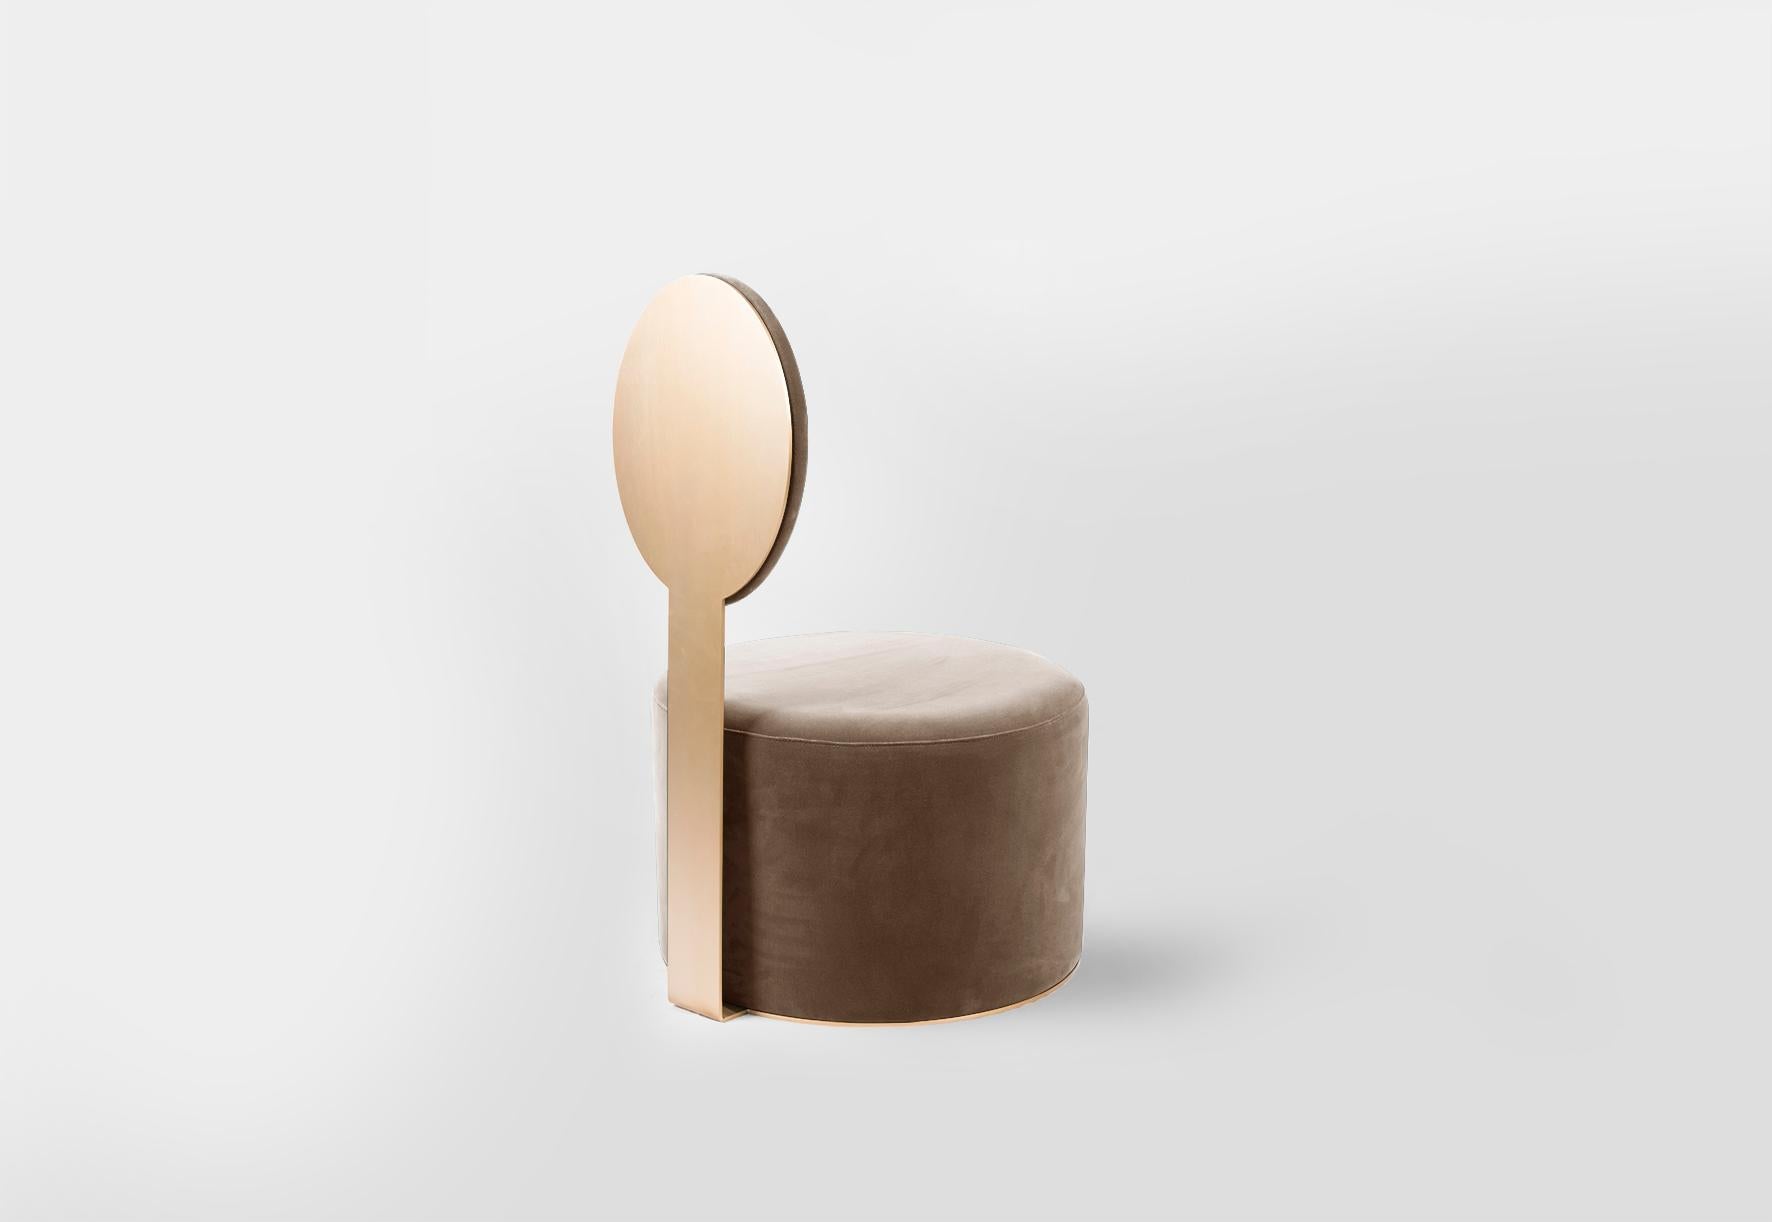 The Pop chair is a lounge chair imagined in its most simple form. Isolating the seat and the back and connecting them with a single metal piece. The clean profile is striking in its simplicity as well as allowing it to slip seamlessly into elegant